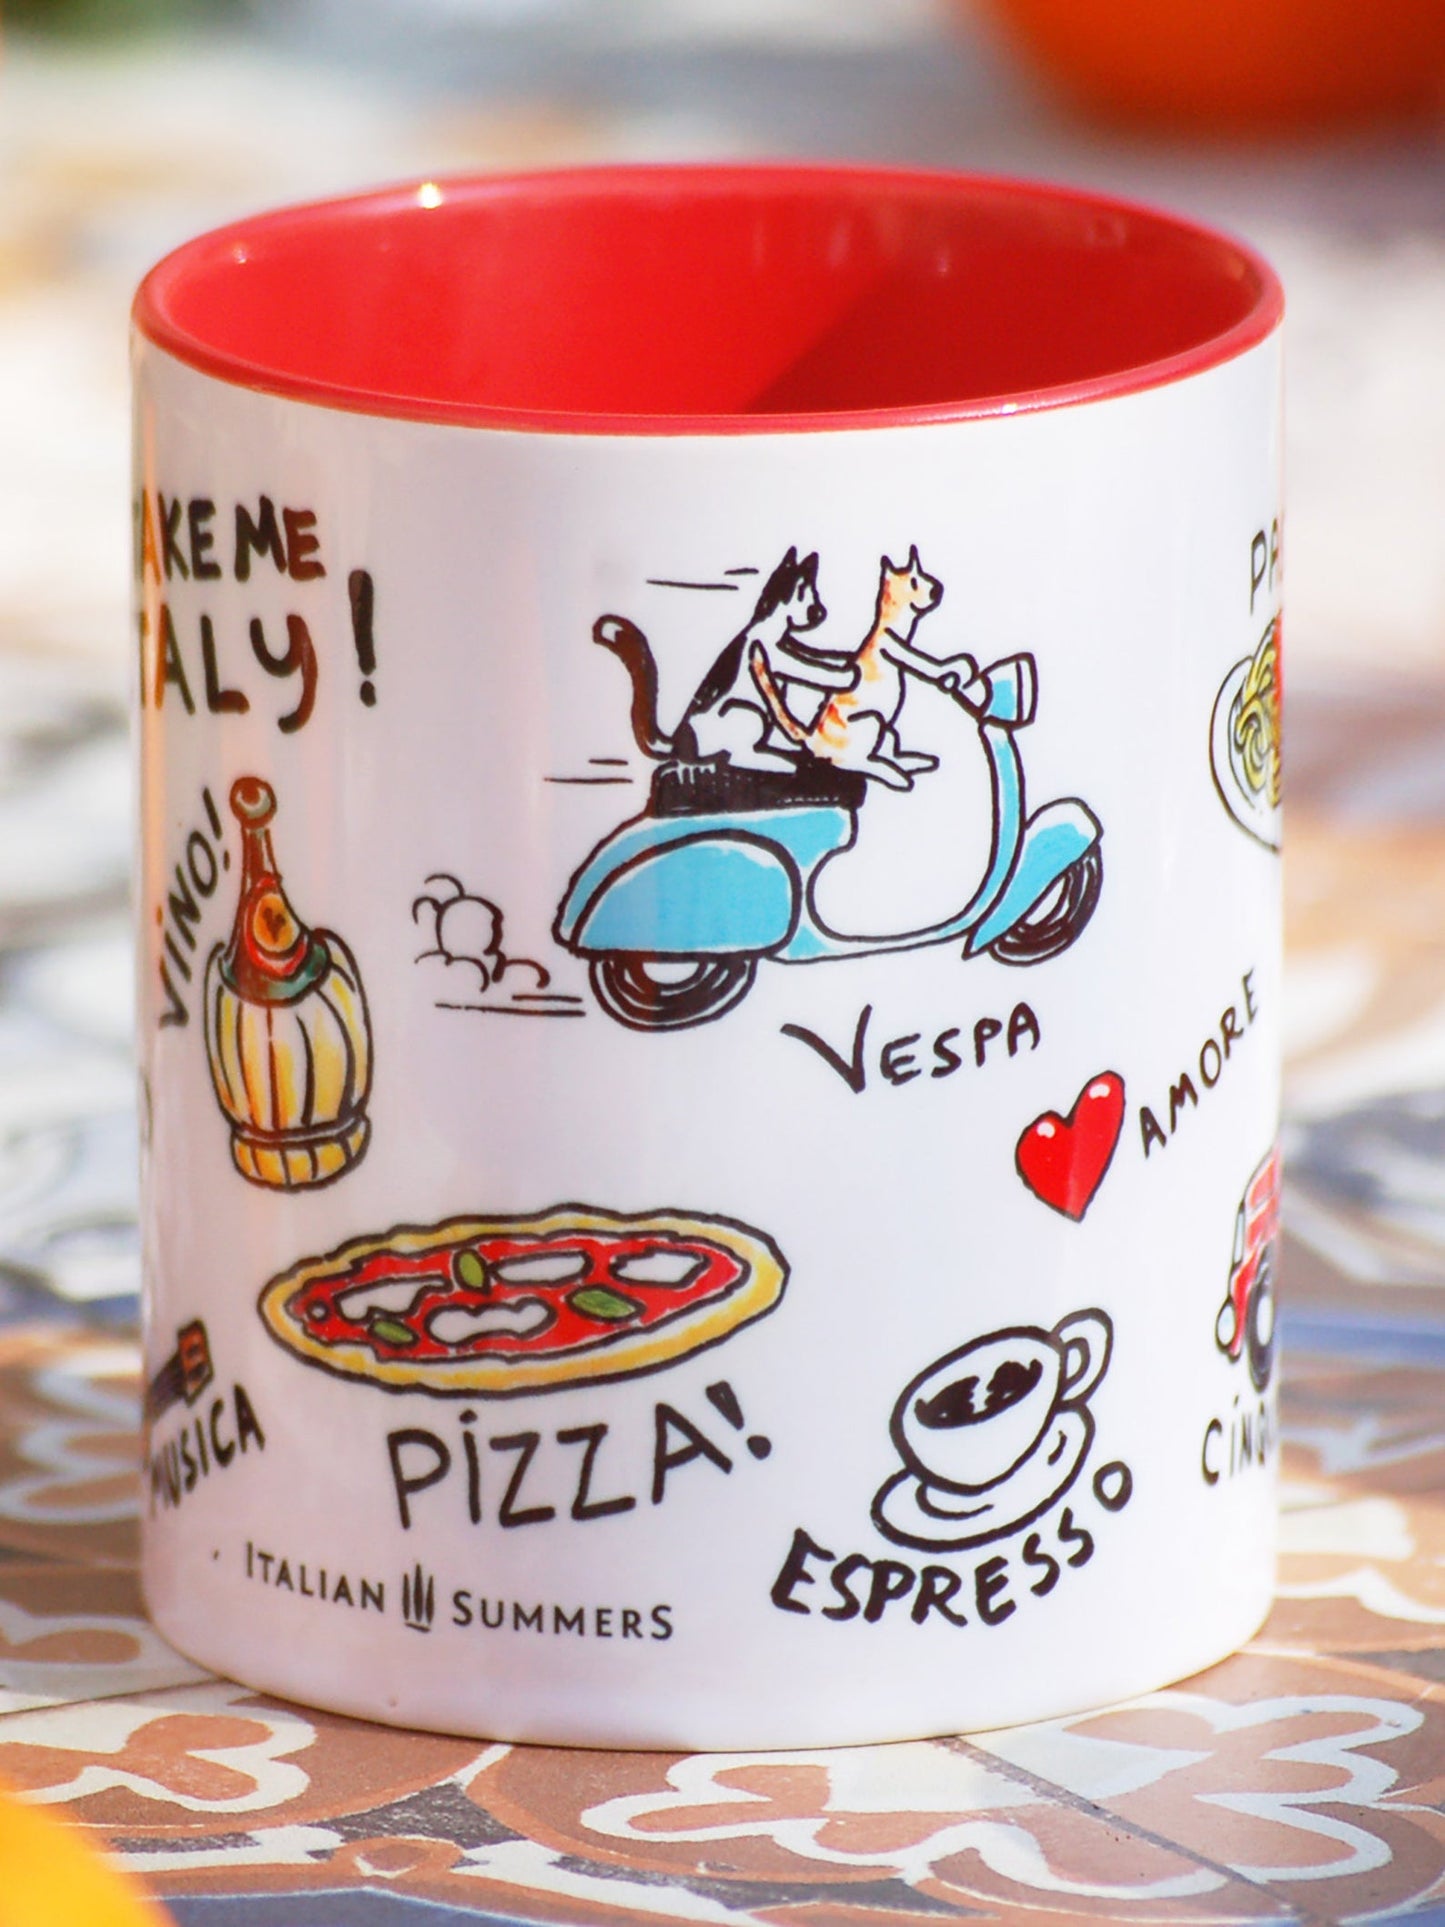 This high-quality mug will have you feeling like you've been transported to the beautiful Italian countryside with its selection of sketches depicting Italy's iconic vita Italiana - like pasta, Vespa, sole, amore, vintage Fiat 500, gelato, vino, pizza espresso and the quote, 'Just take me to Italy'!